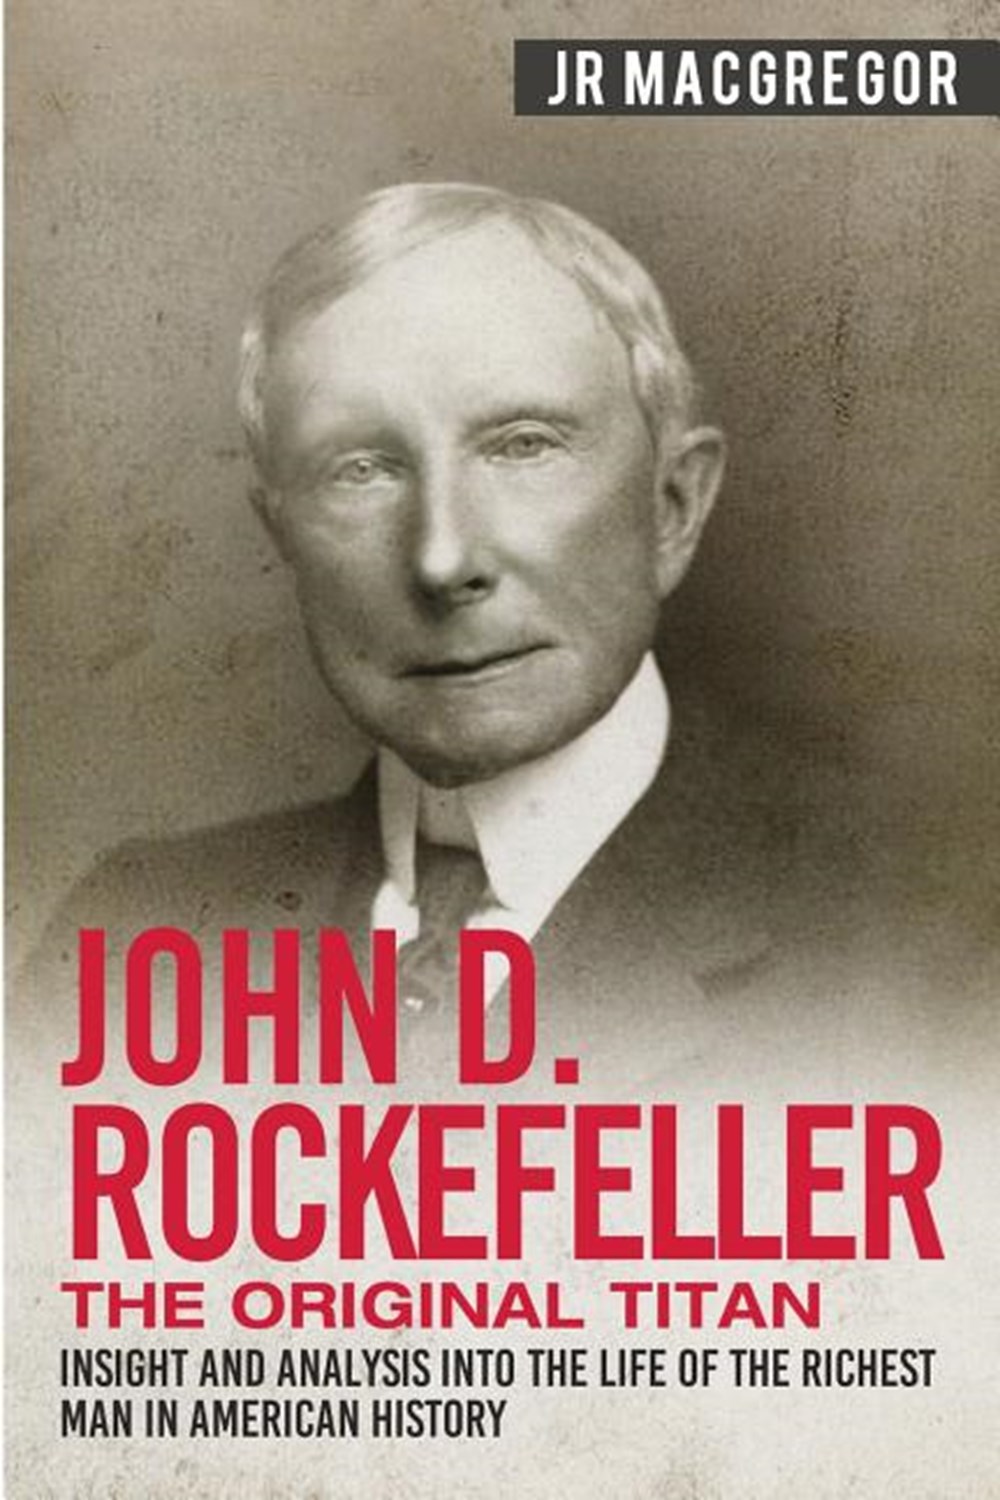 John D. Rockefeller - The Original Titan Insight and Analysis into the Life of the Richest Man in Am